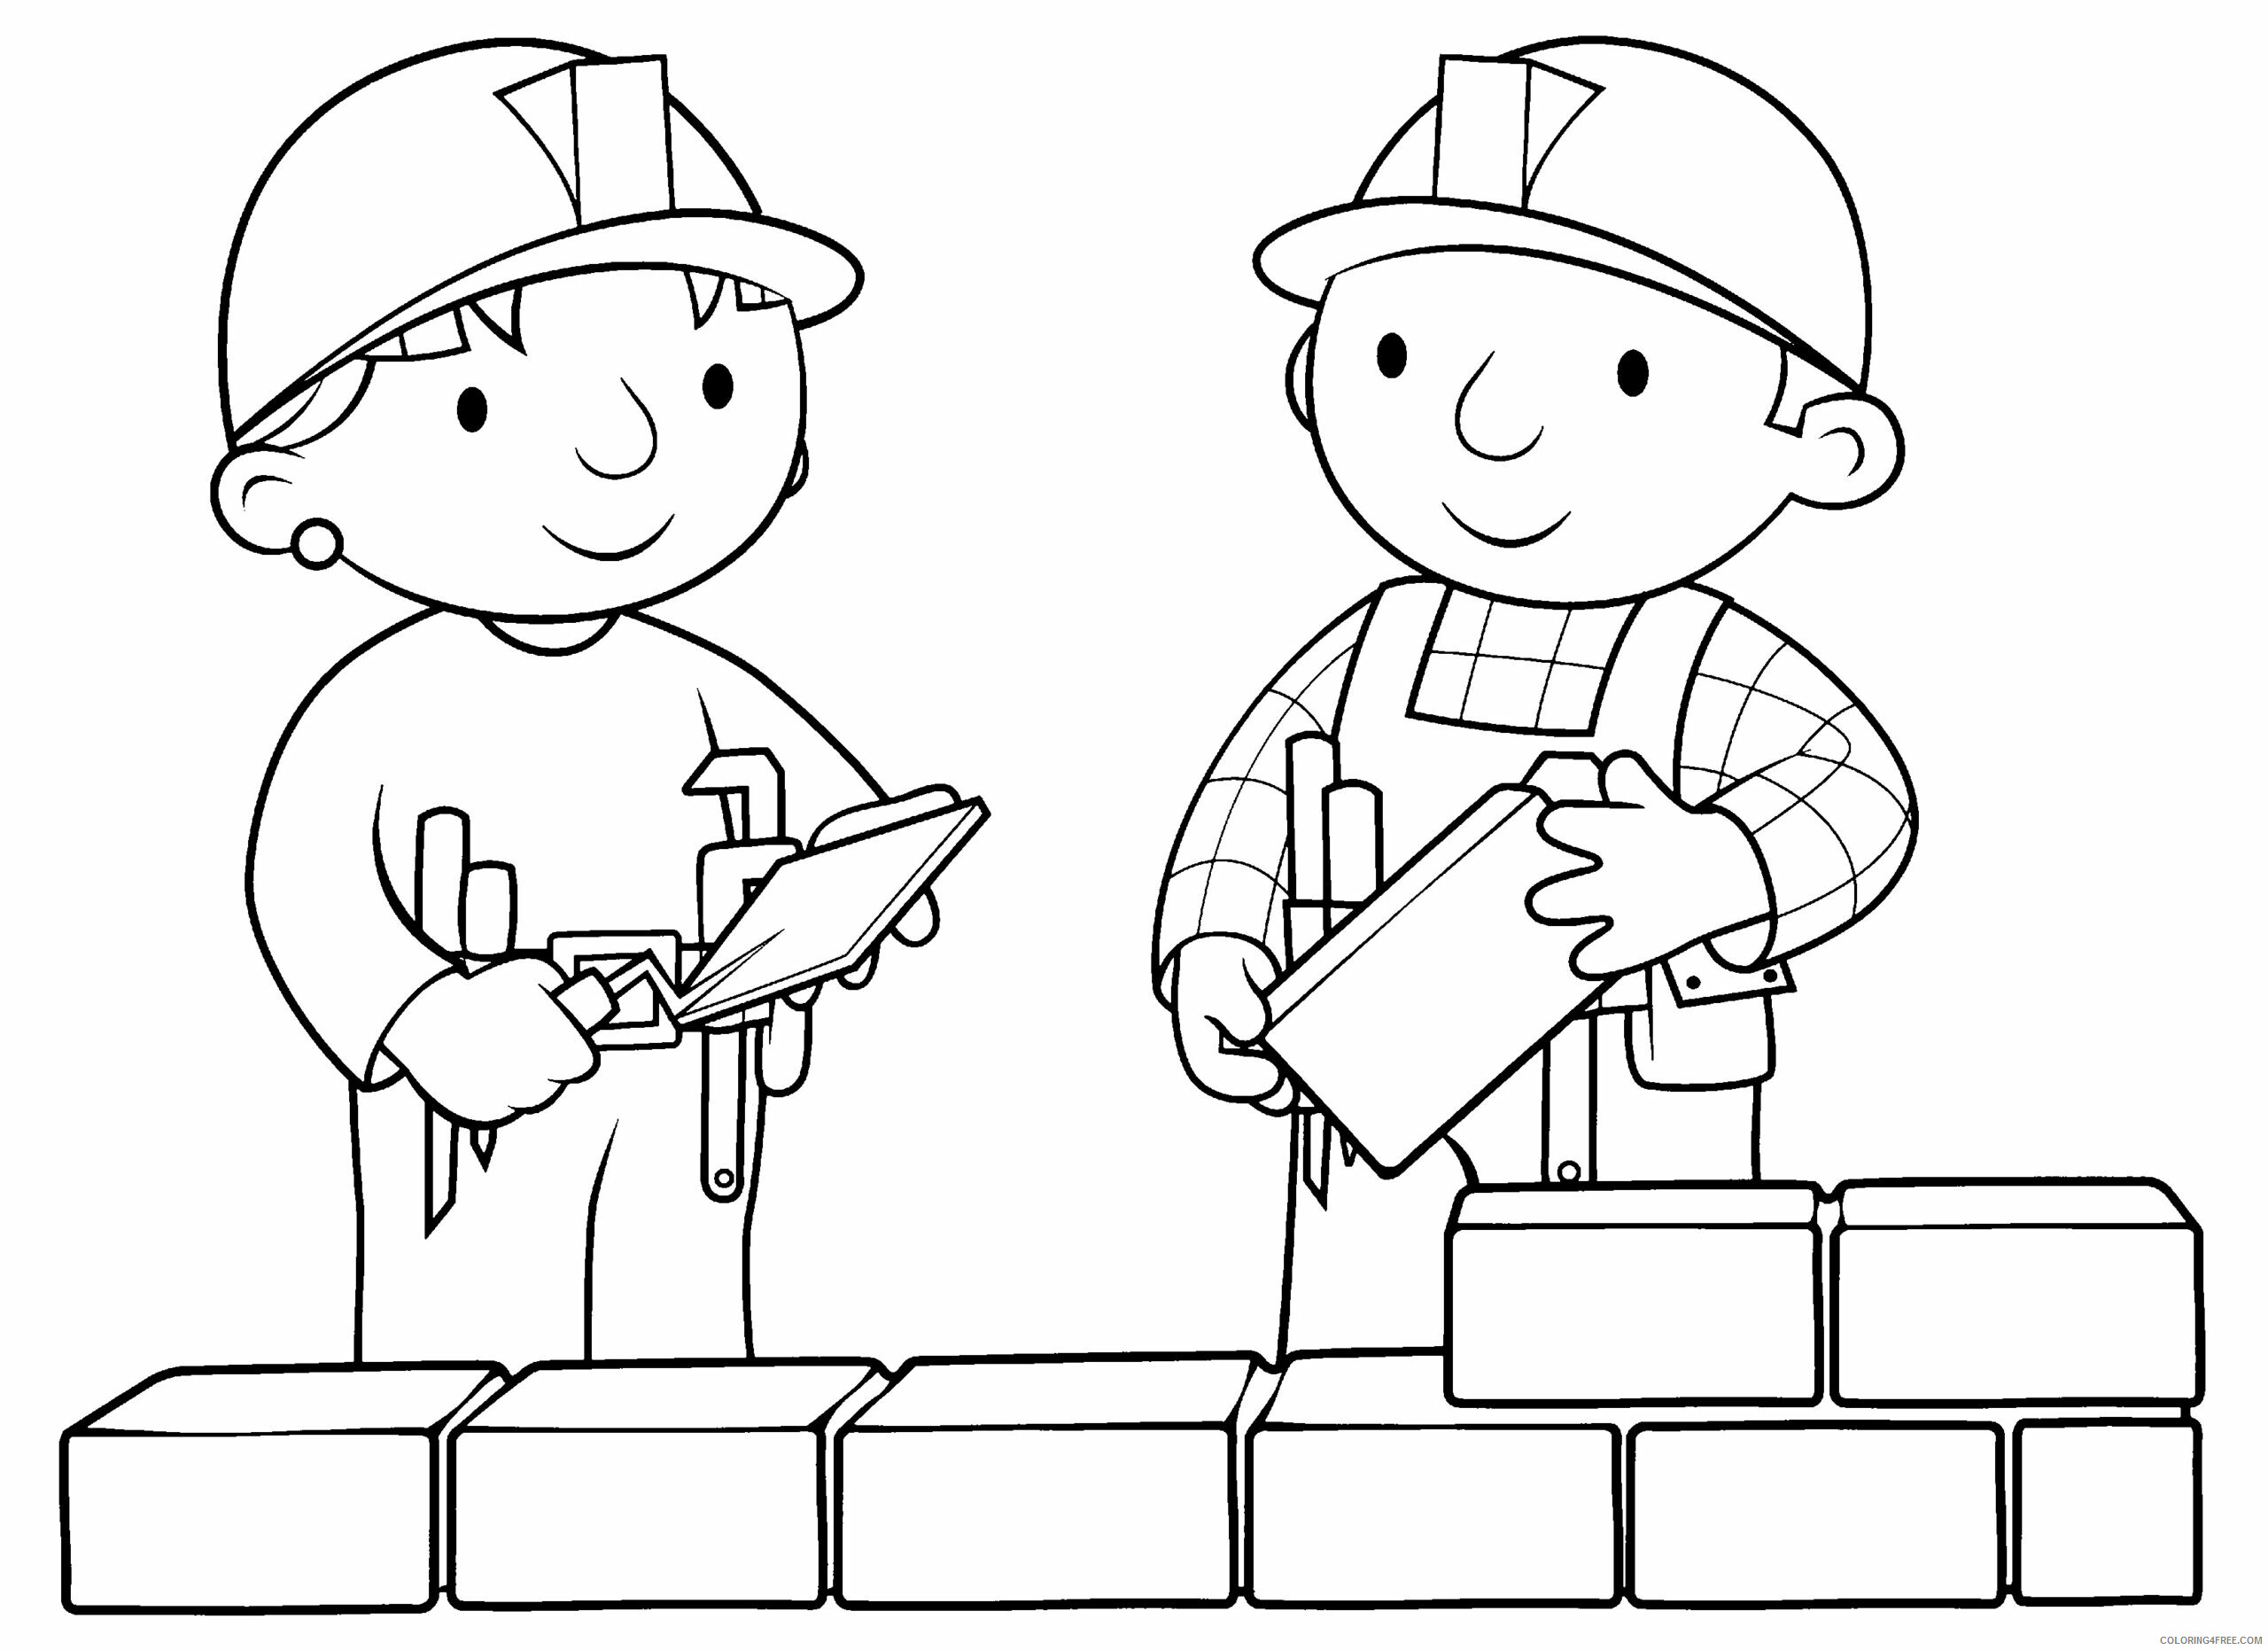 Bob the Builder Coloring Pages TV Film bob the builder 19 2 Printable 2020 01032 Coloring4free